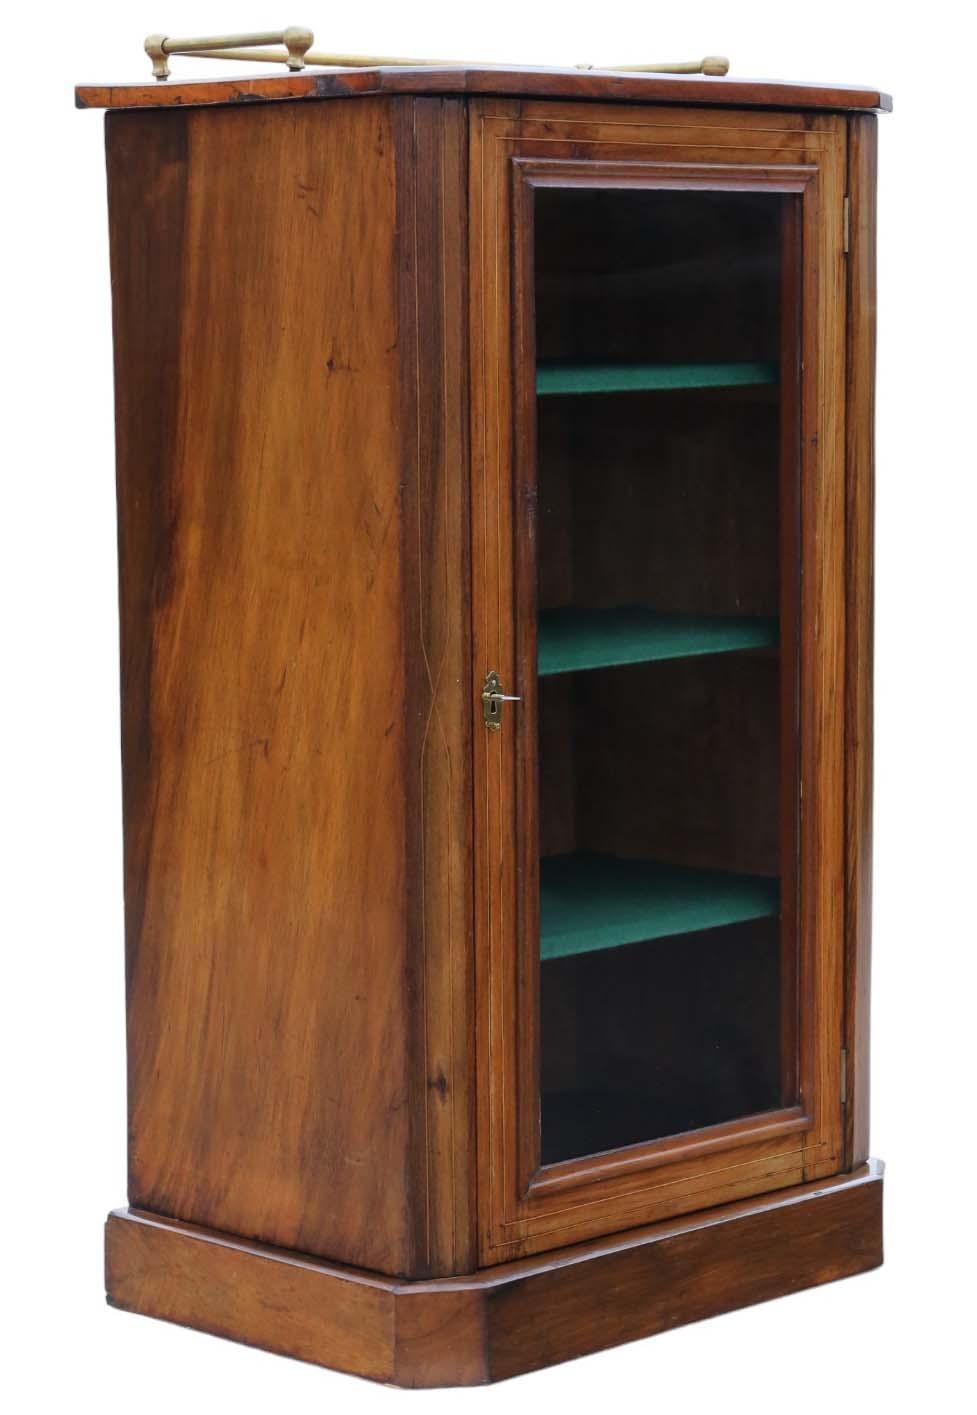 Antique C1880 quality inlaid walnut music pier display cabinet In Good Condition For Sale In Wisbech, Cambridgeshire